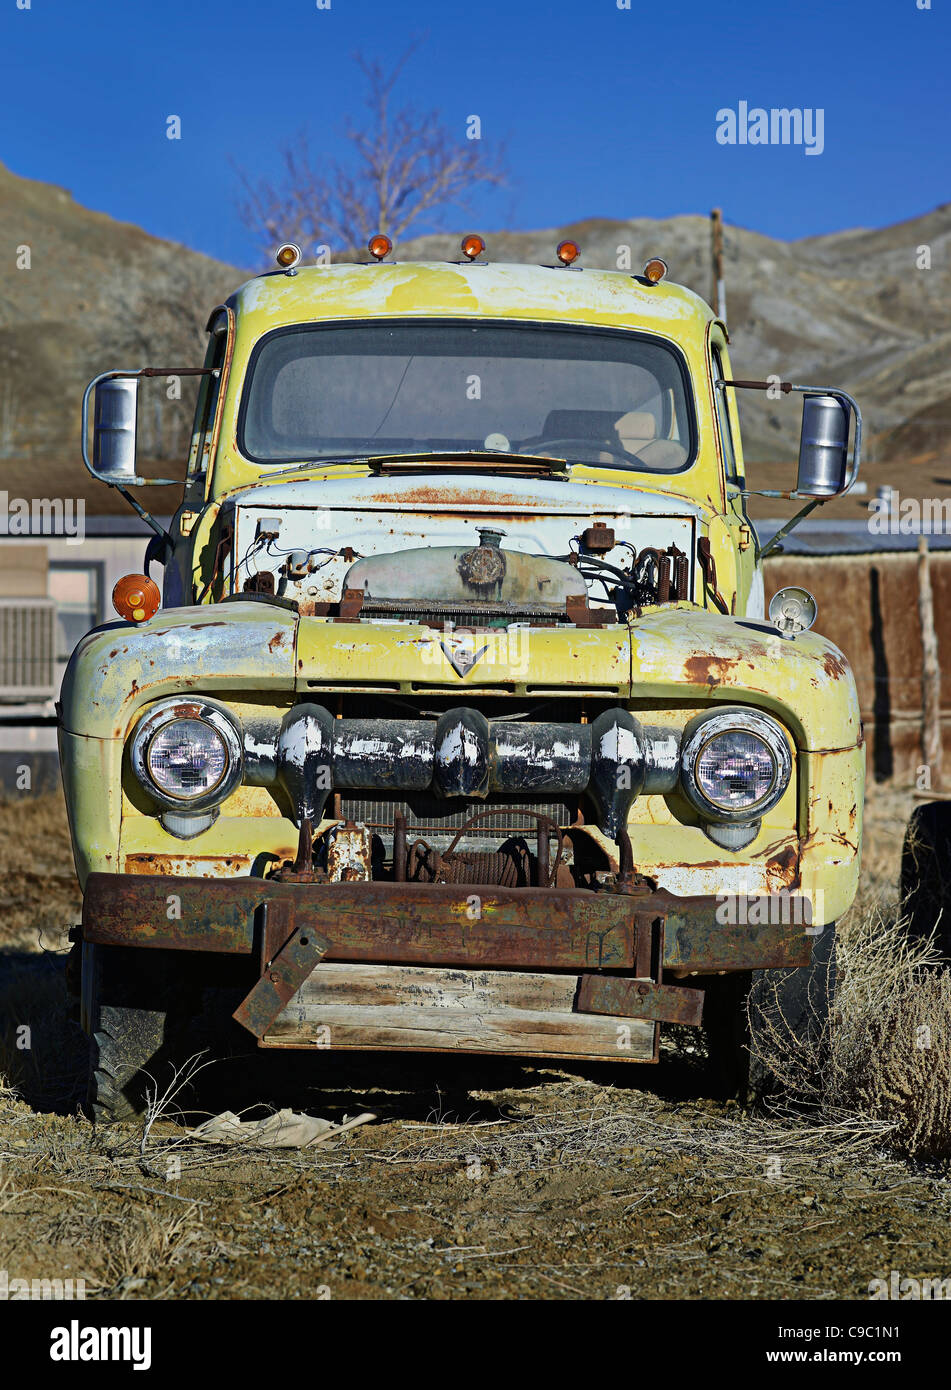 Old Abandoned Junked Yellow Truck, Nevada, USA Stock Photo